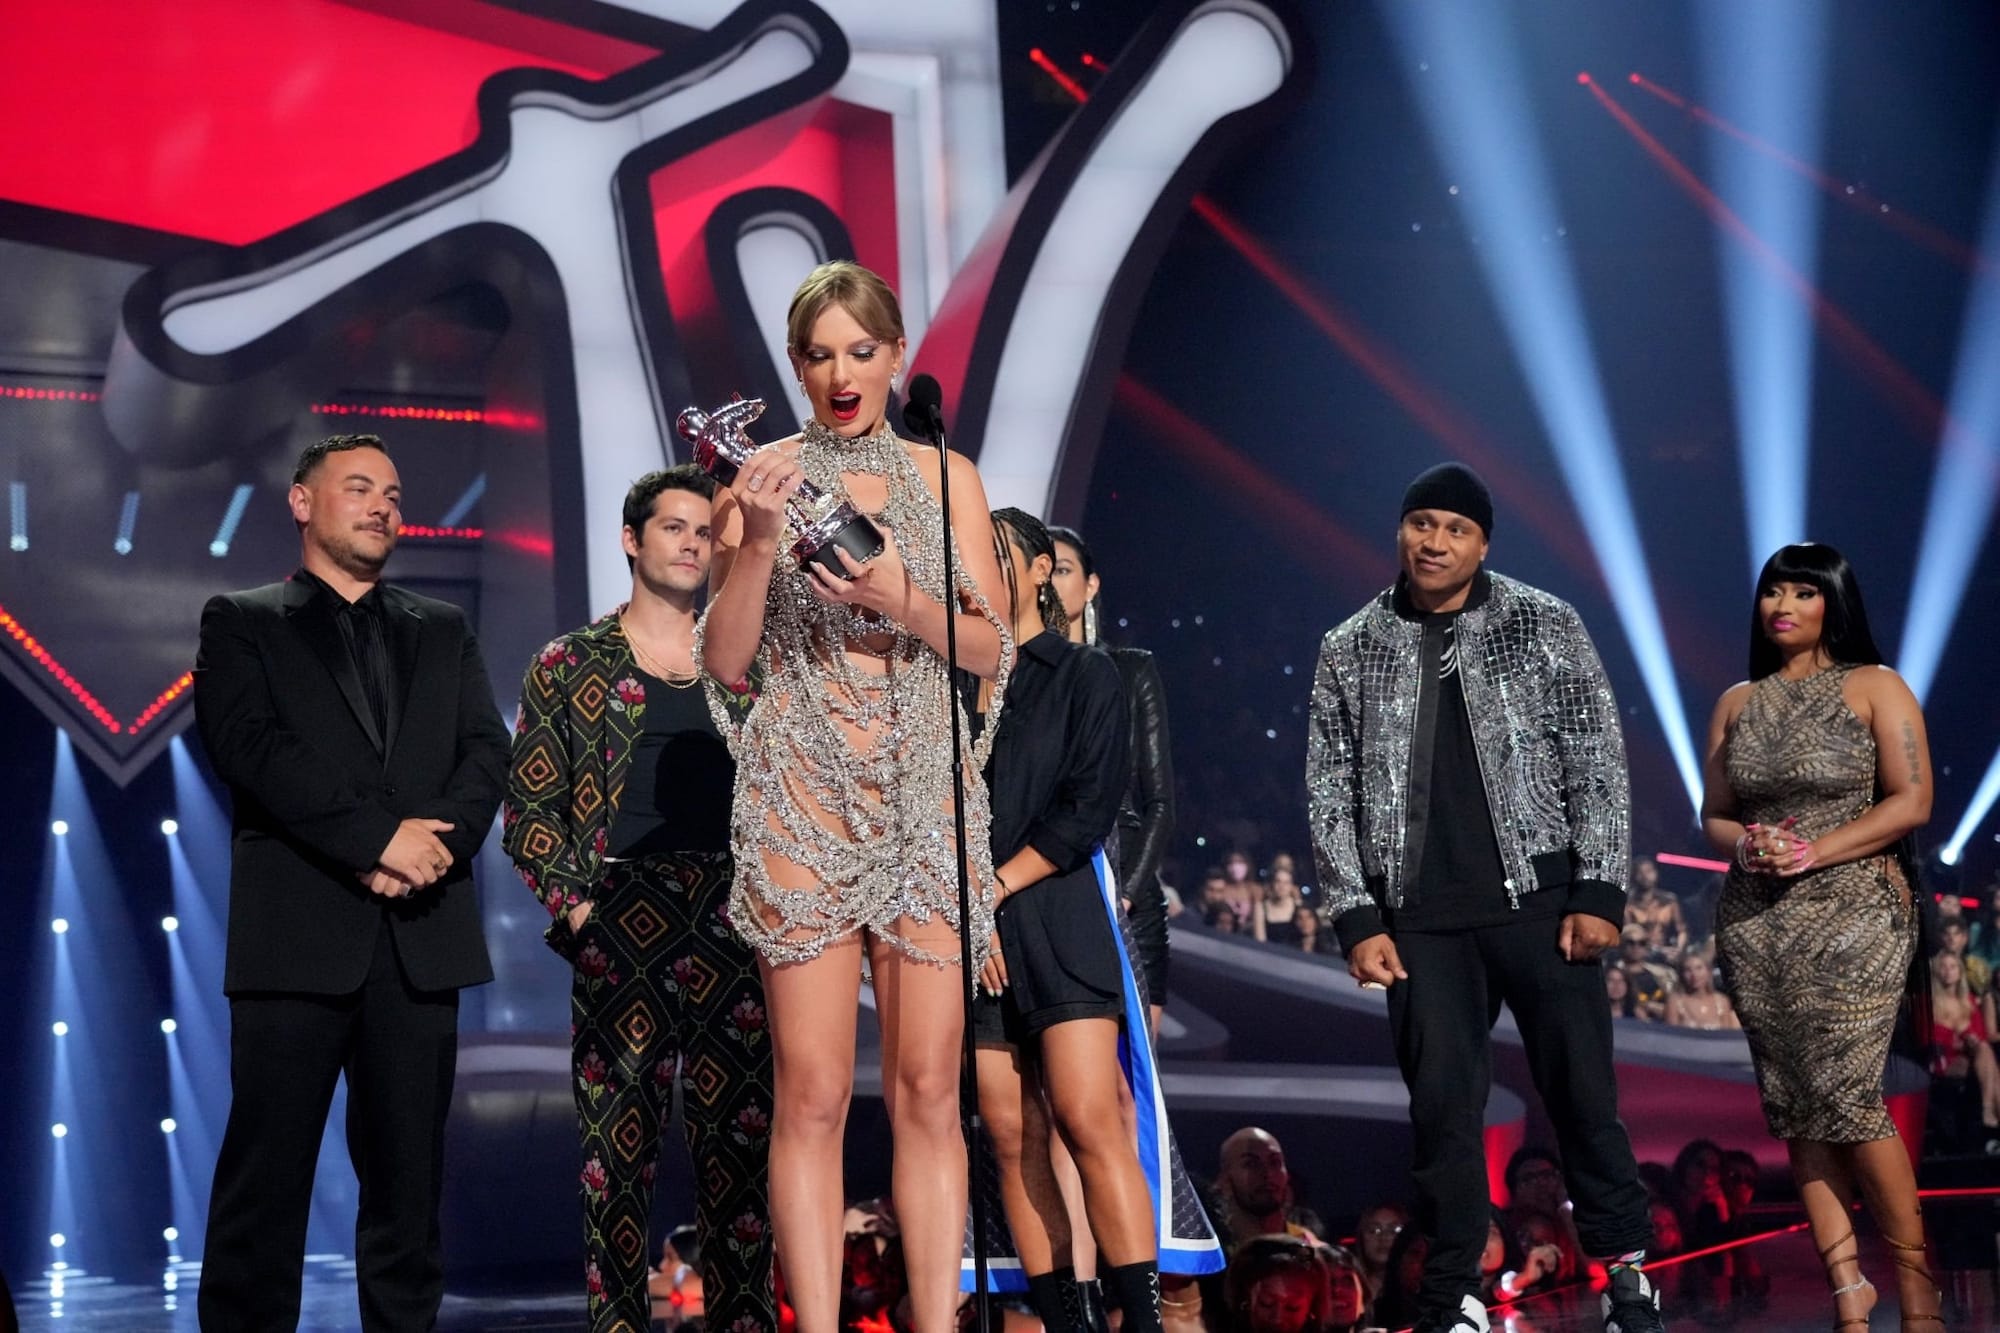 Taylor Swift won the 'Video of the Year' award for All Too Well at the 2022 MTV Video Music Awards (VMAs).